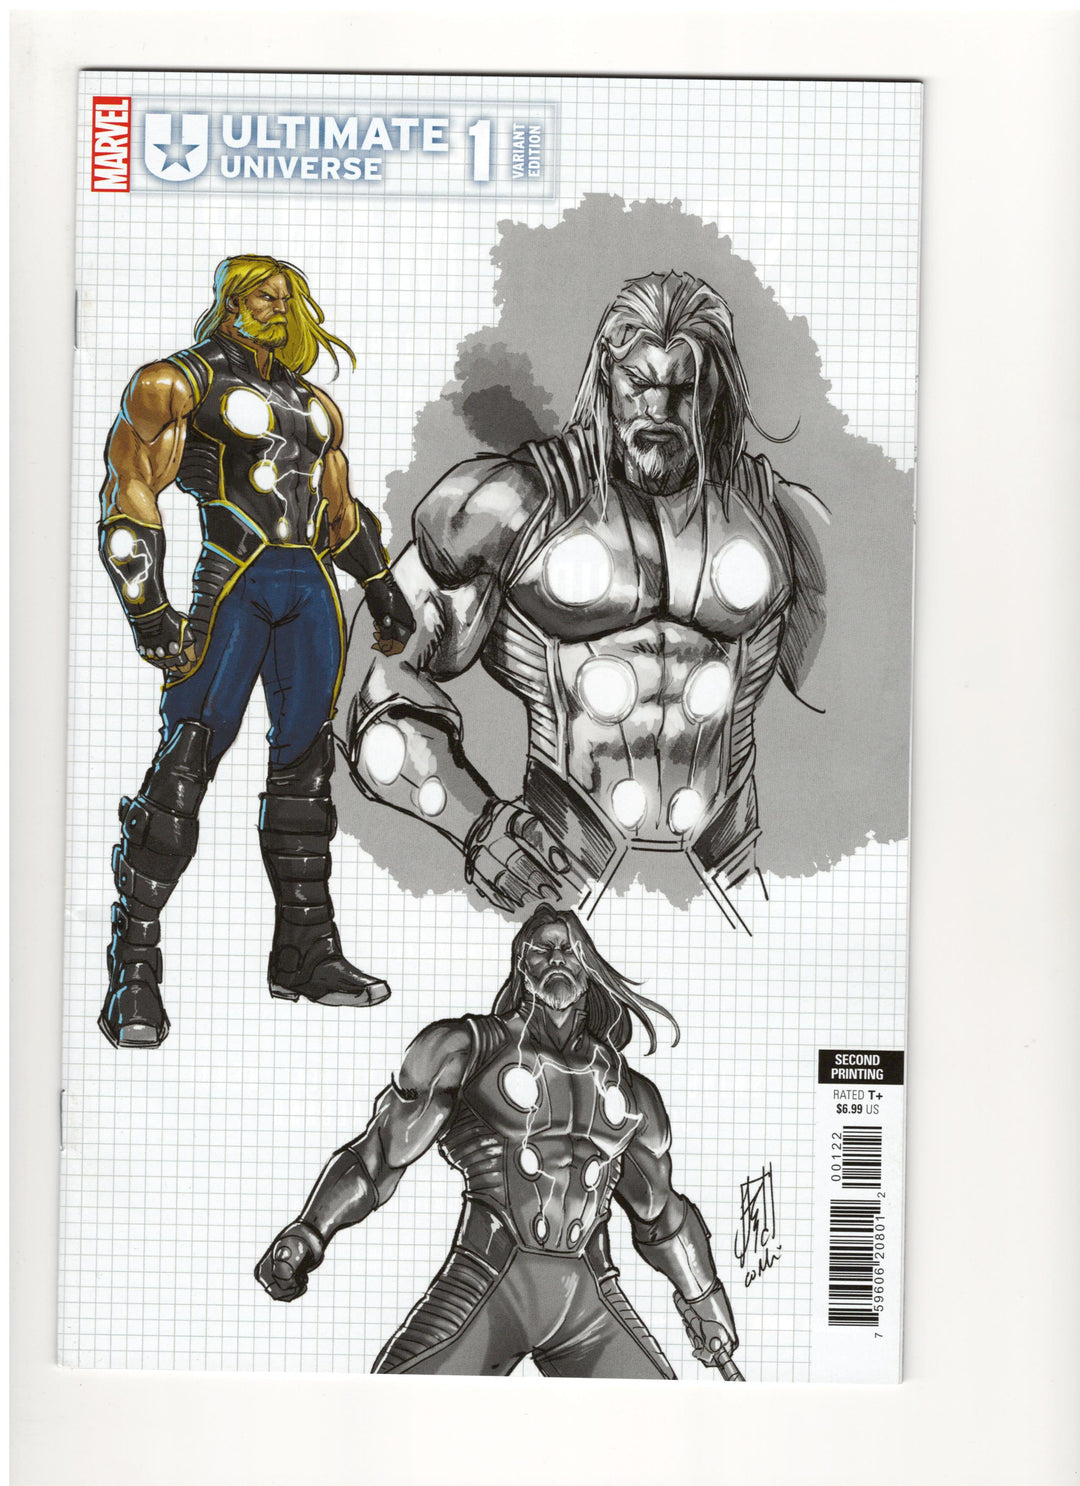 Ultimate Universe #1 Variant (2nd Print) Stefano Caselli (1:25) Edition